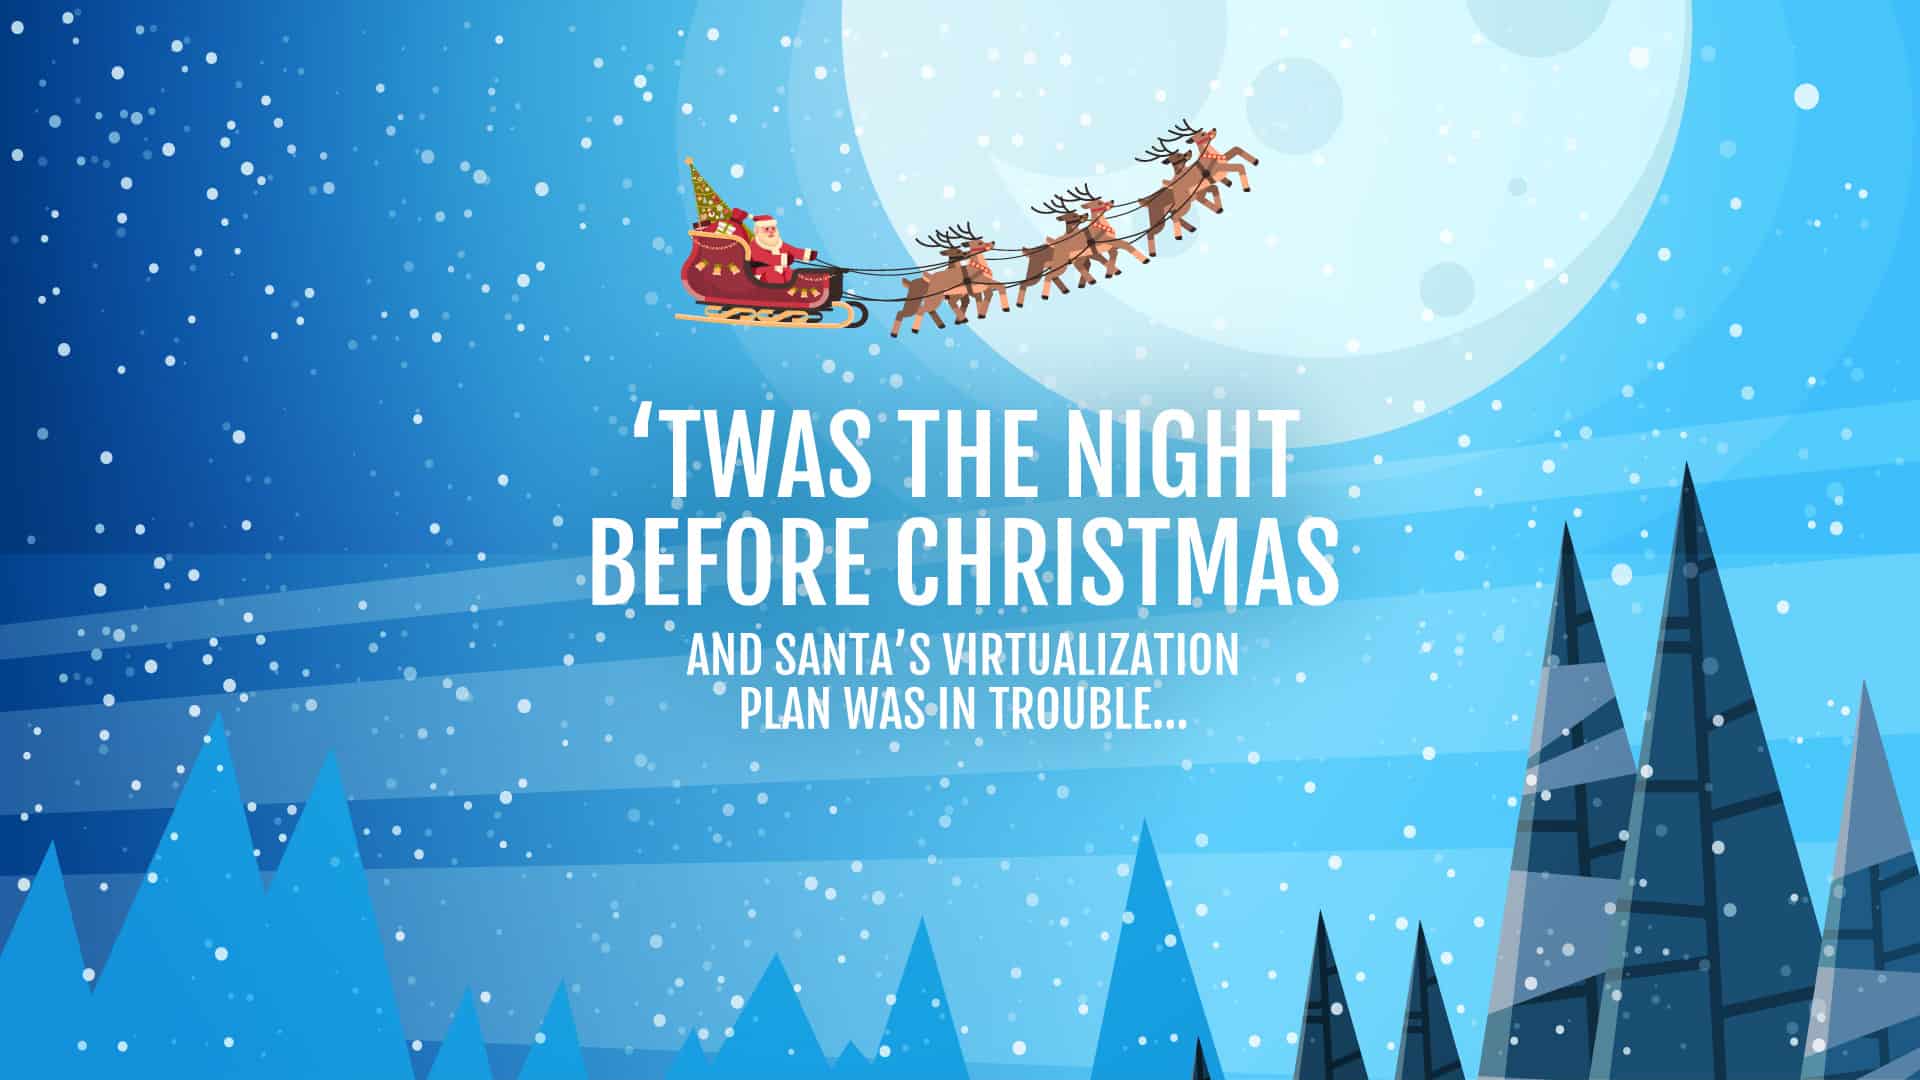 Virtualization Plan at North Pole Leads to Christmas Chaos for Santa!